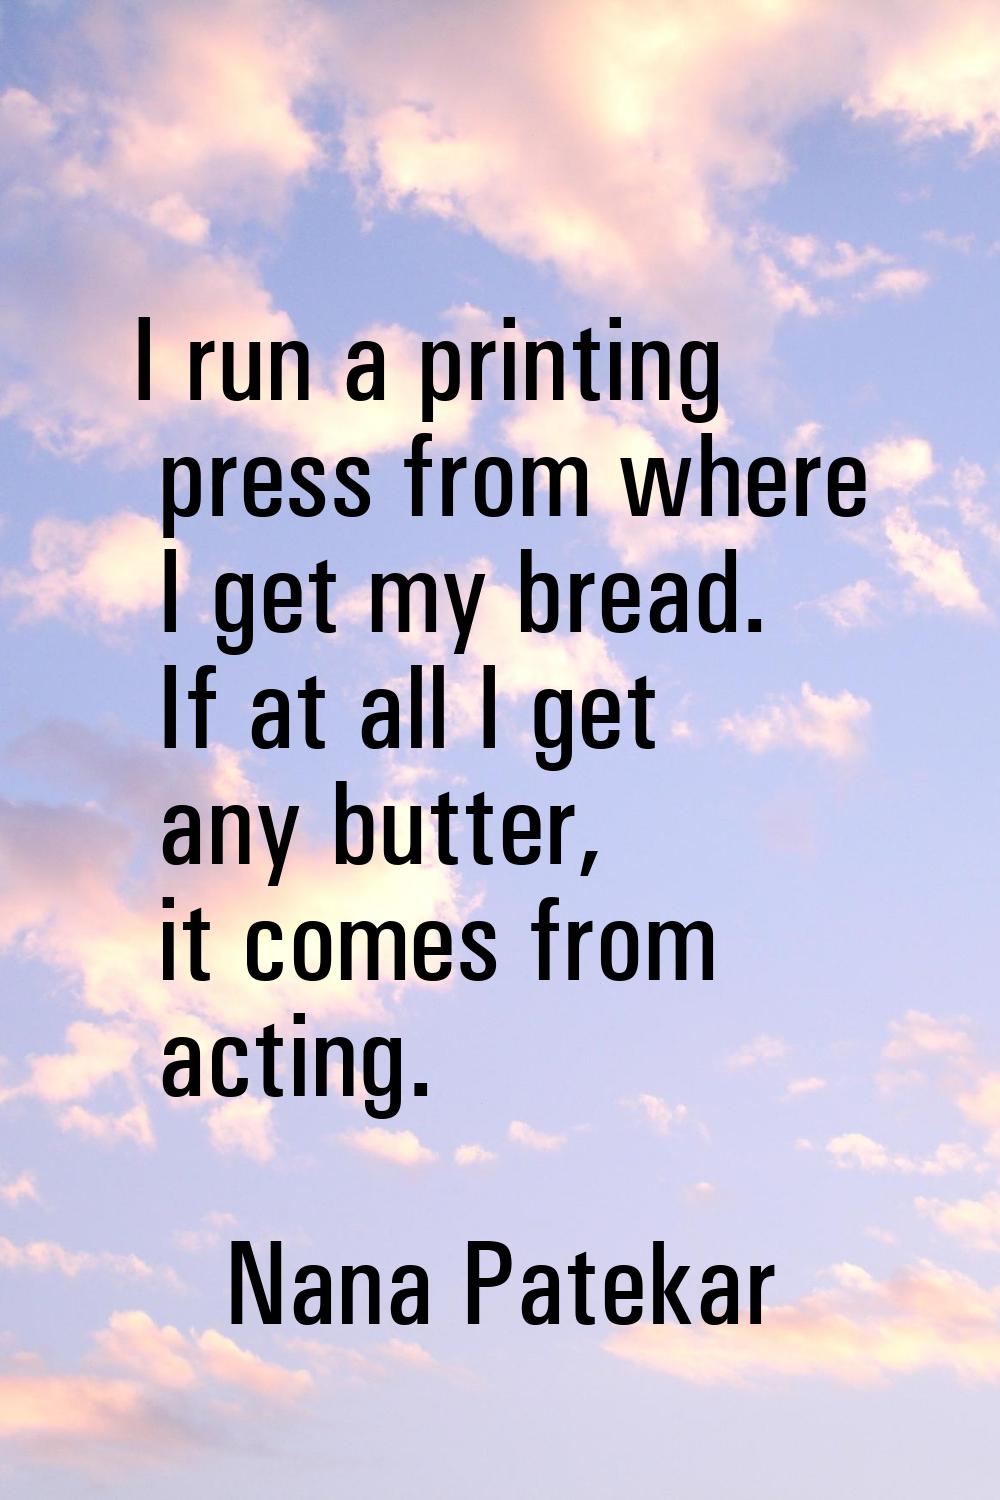 I run a printing press from where I get my bread. If at all I get any butter, it comes from acting.